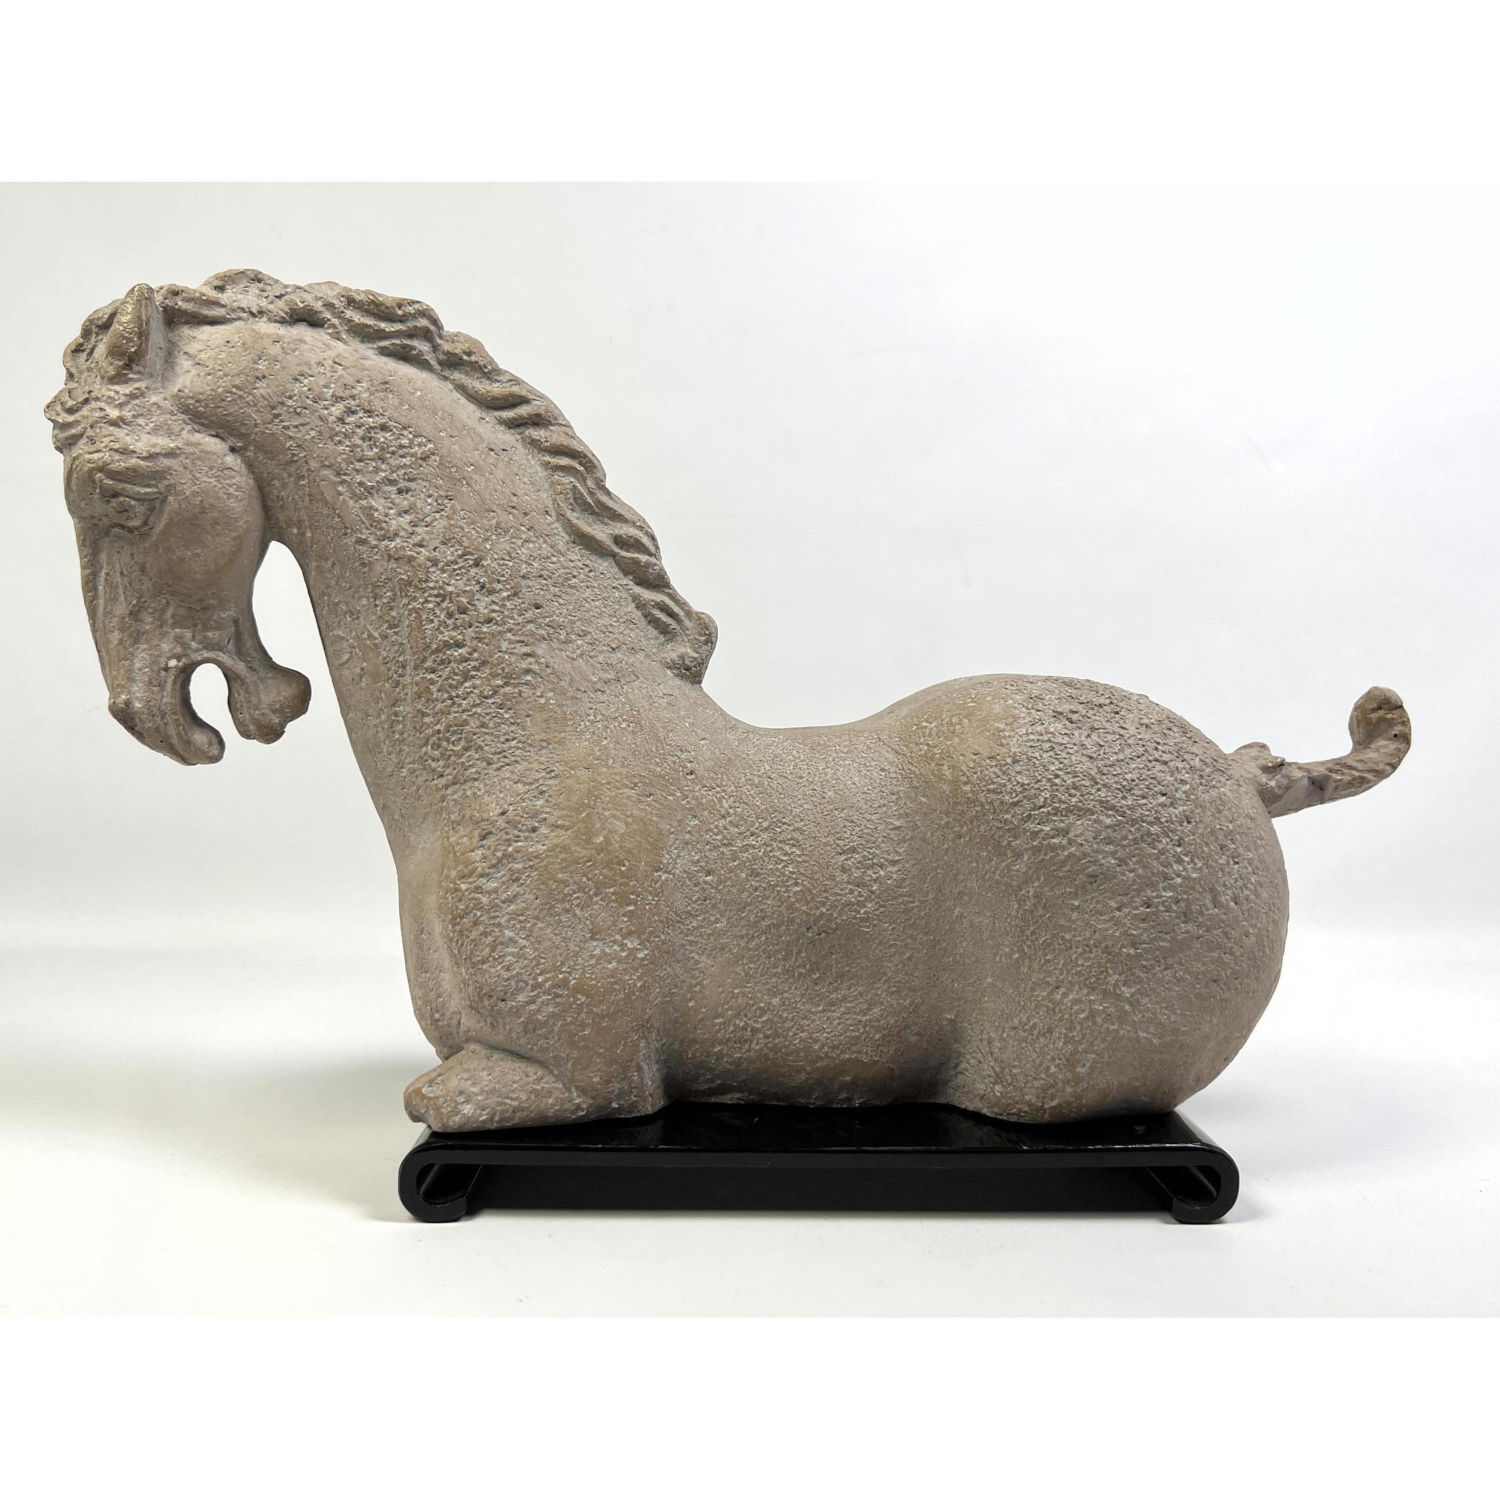 AUSTIN PRODUCTS Resin Horse Sculpture.